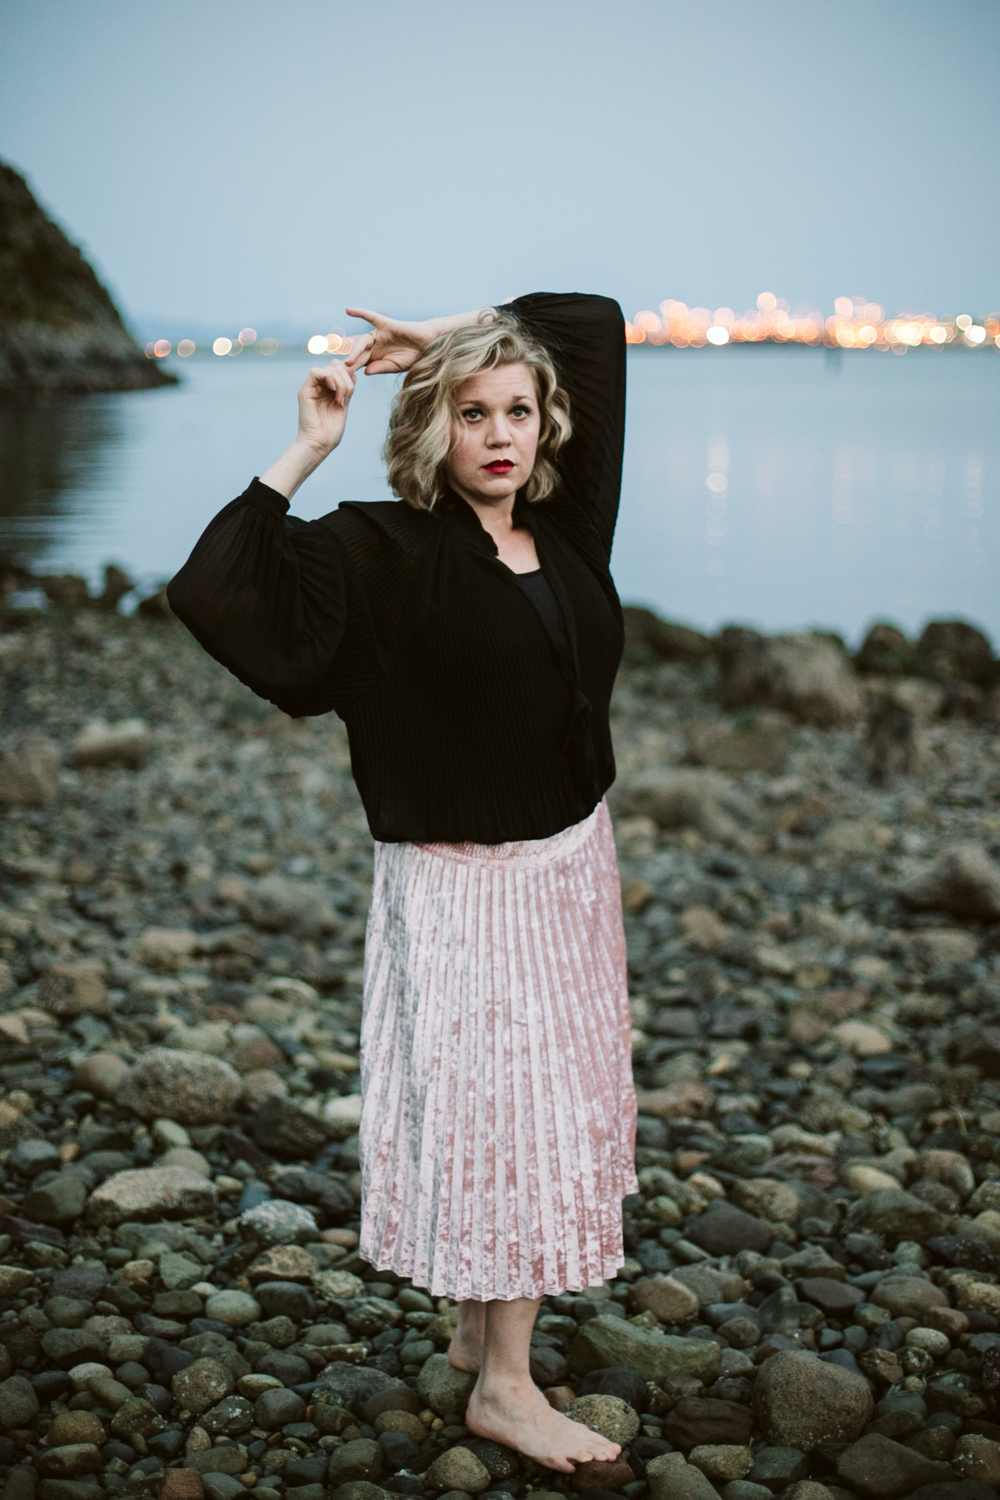 vintage by the sea | Karisa Anna Photography